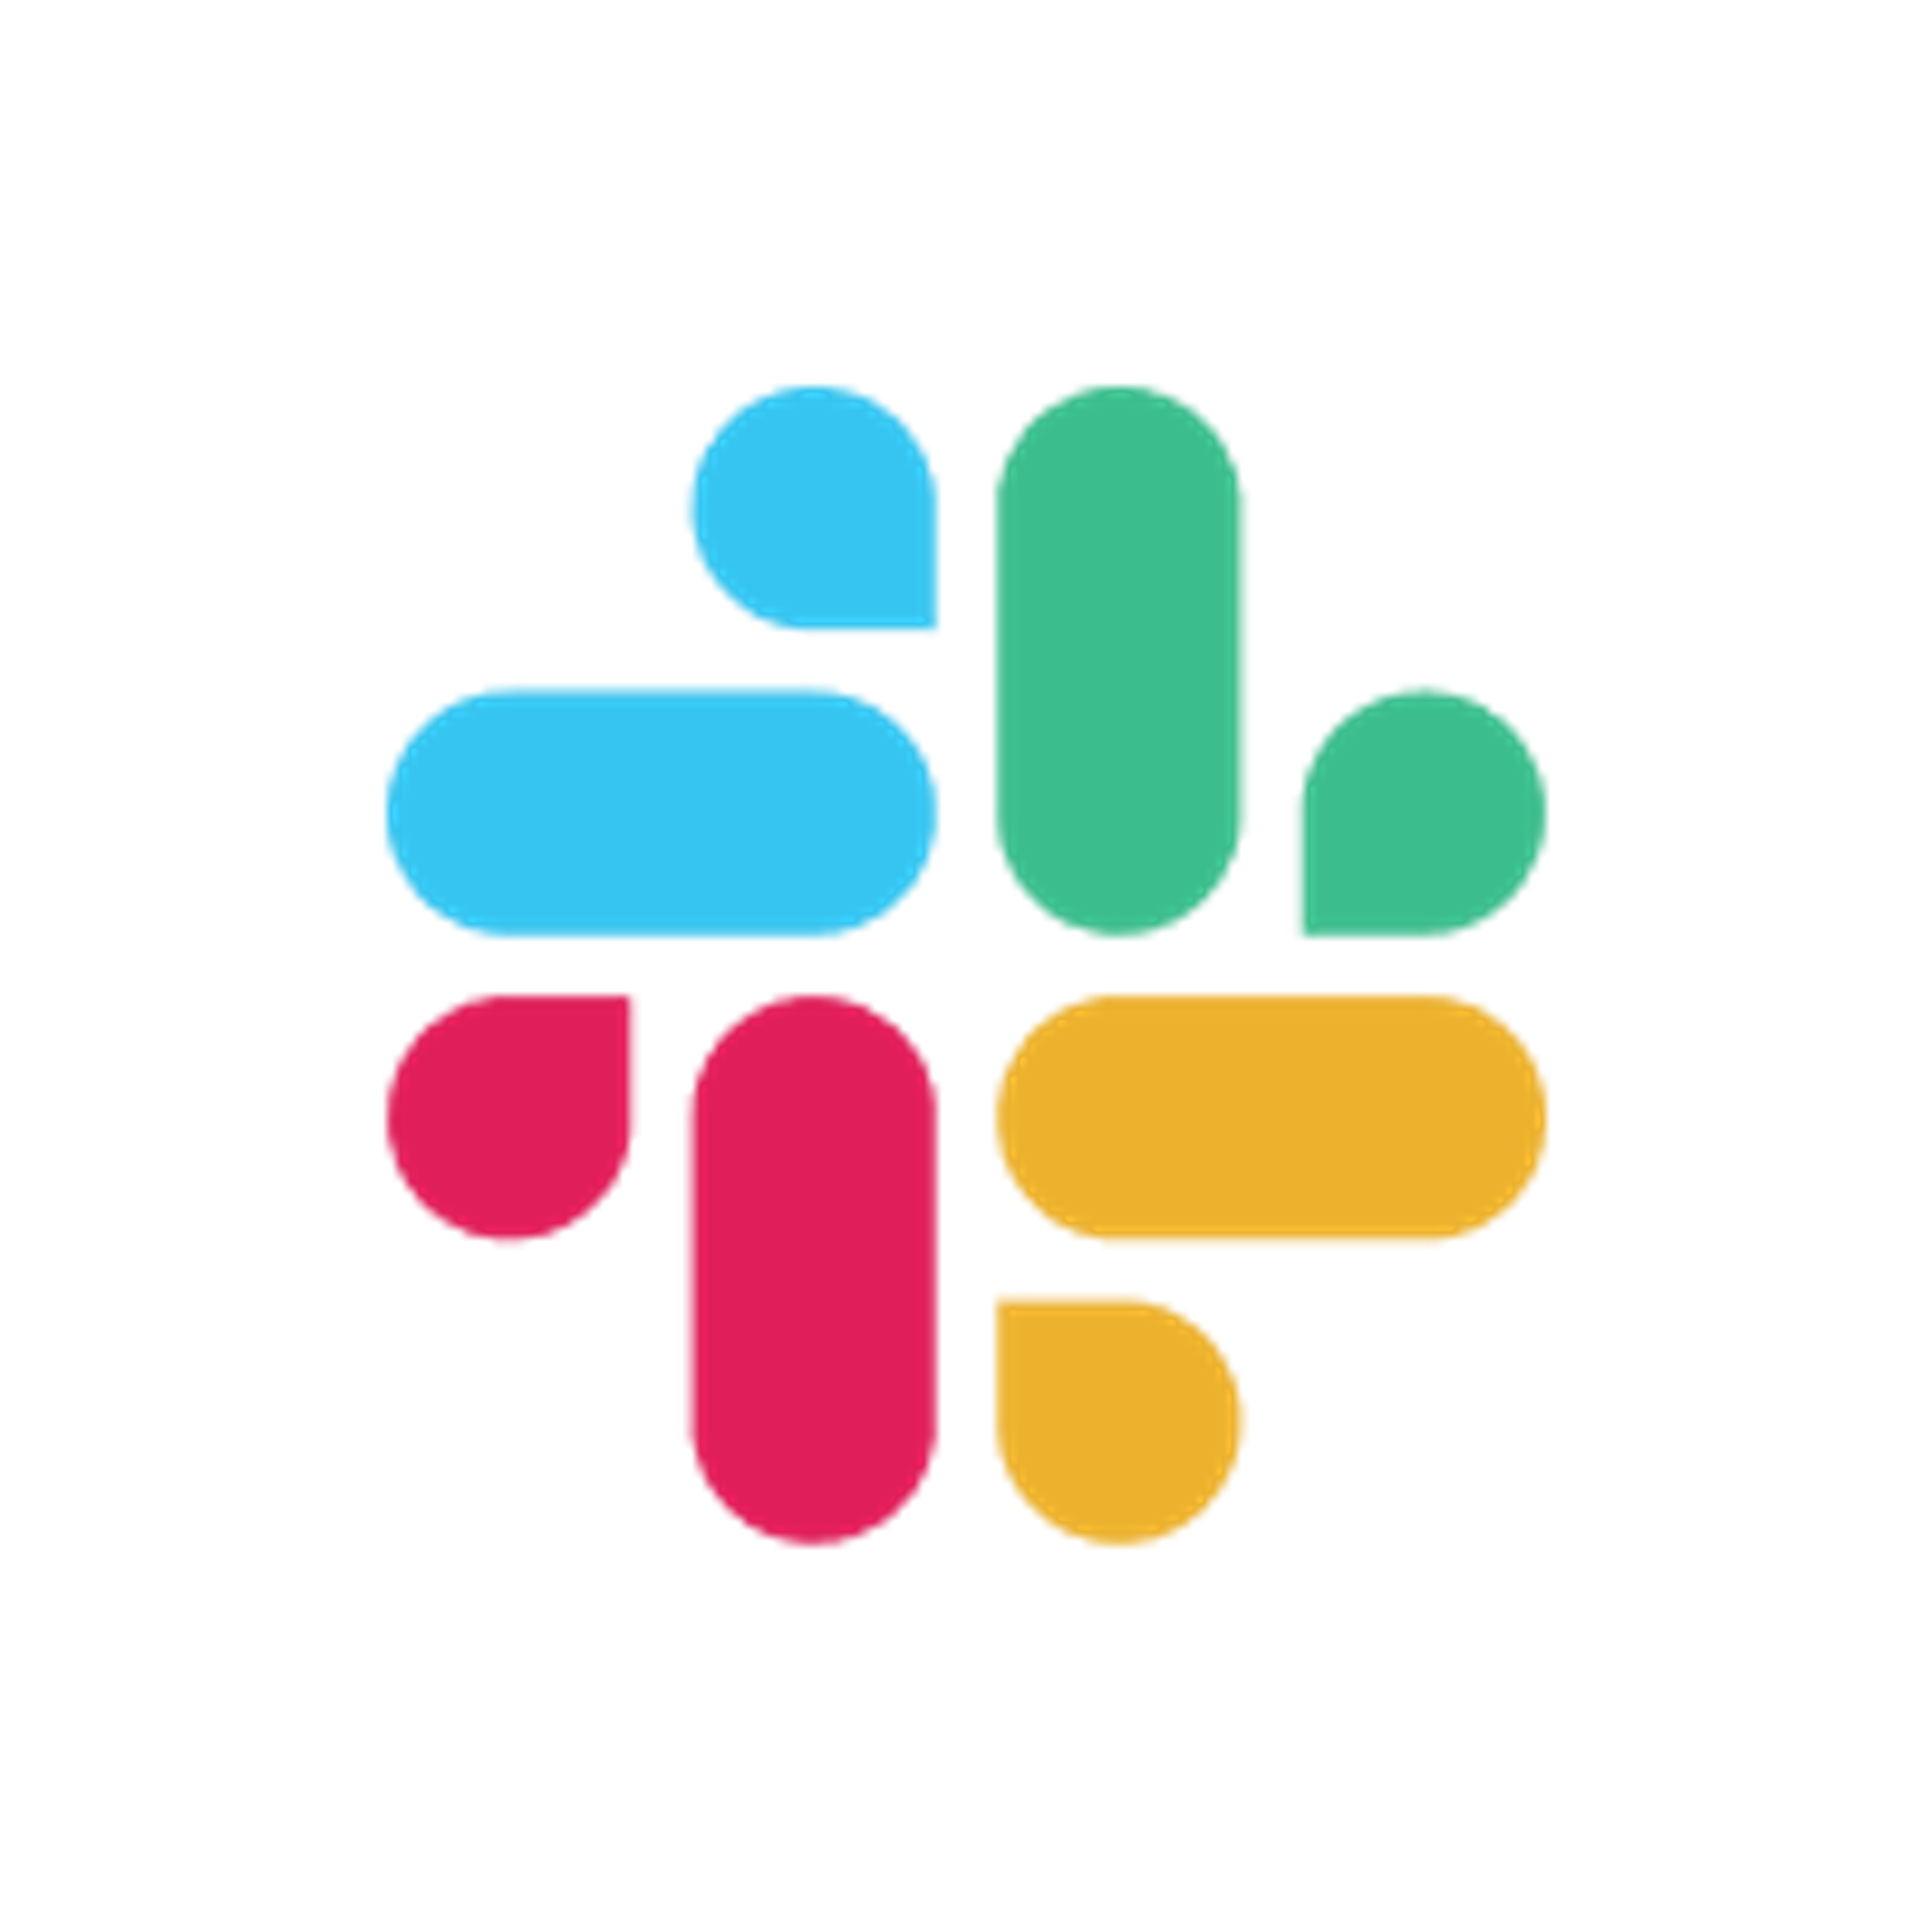 Send Slack notifications for new Tally responses